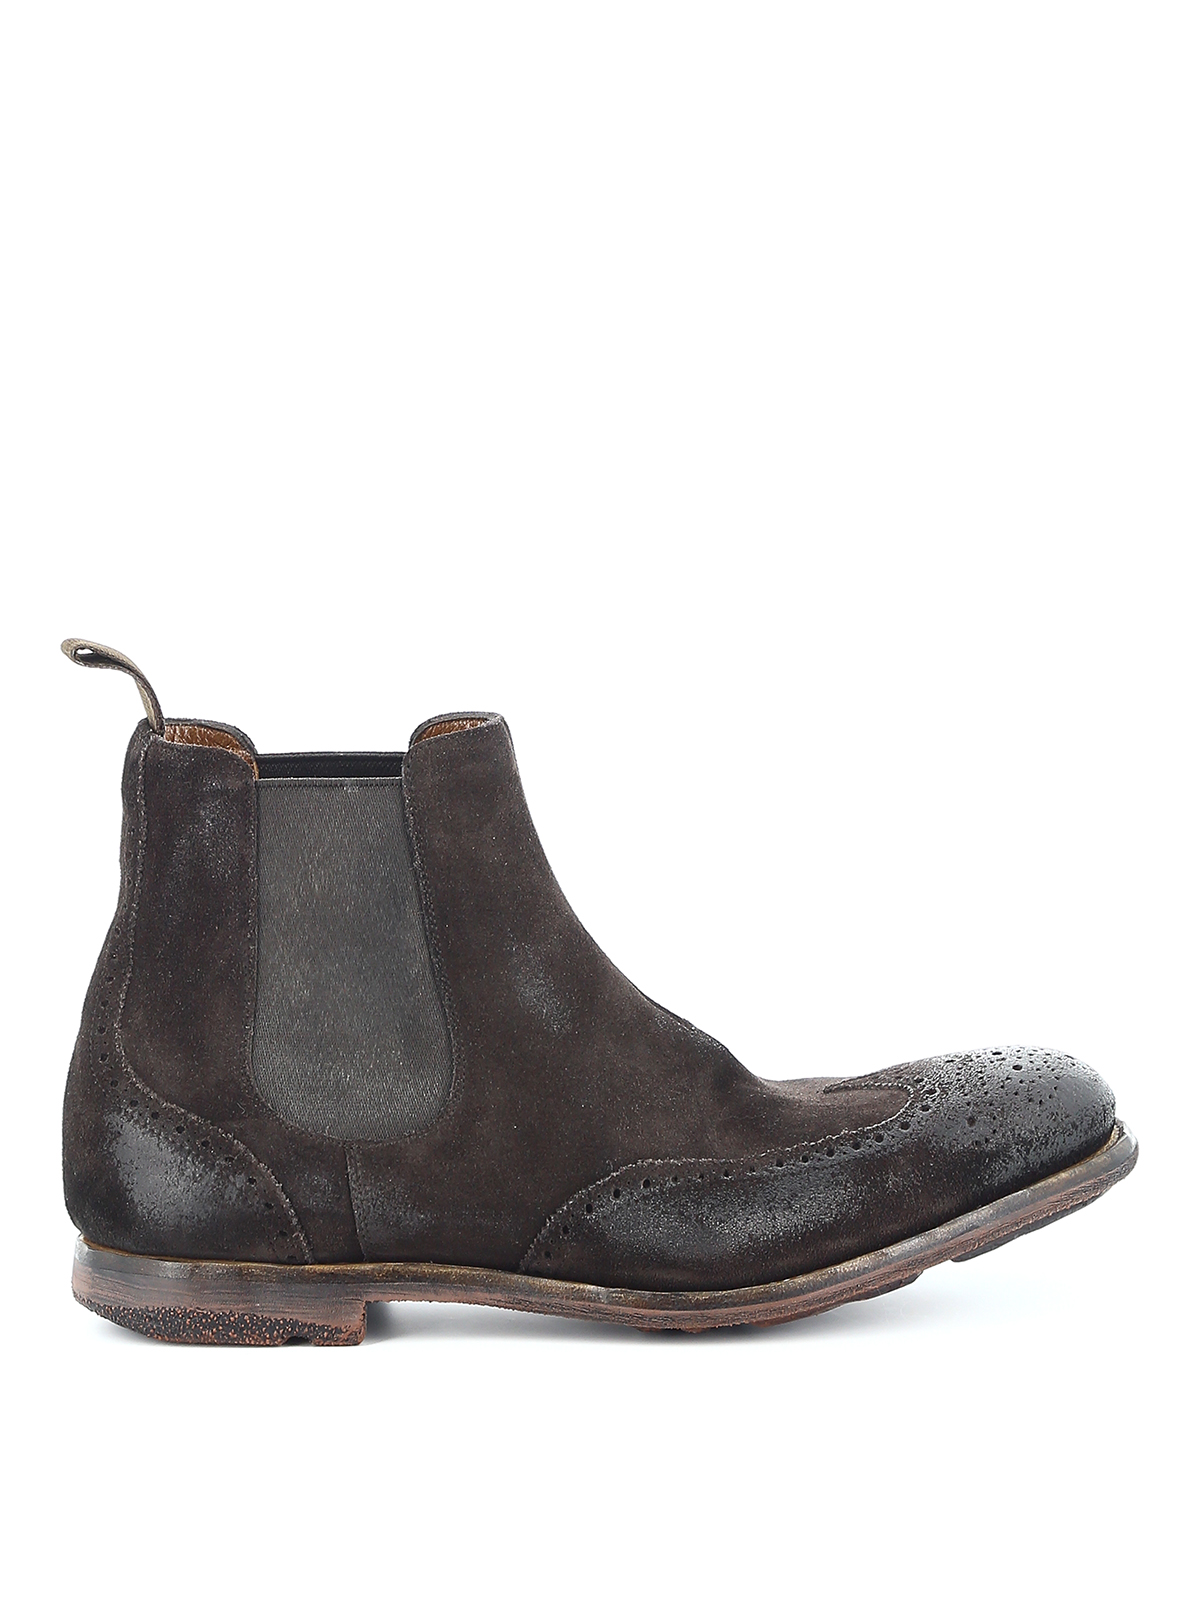 CHURCH'S KETSBY 1930 ANKLE BOOTS